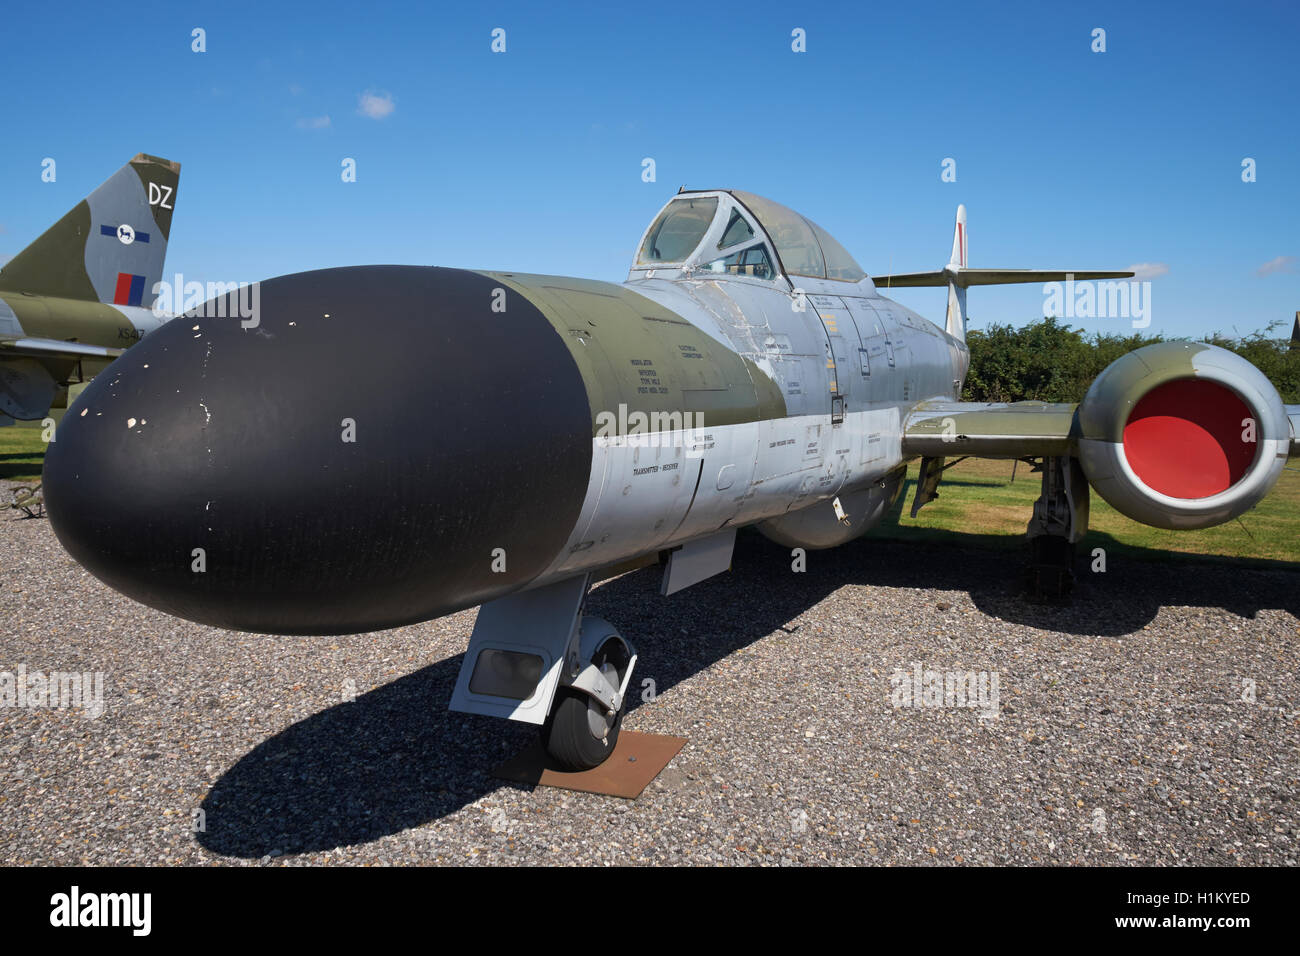 A Gloster Meteor NF(T)14 night fighter trainer aircraft on display at the Newark Air Museum, Nottinghamshire, England. Stock Photo